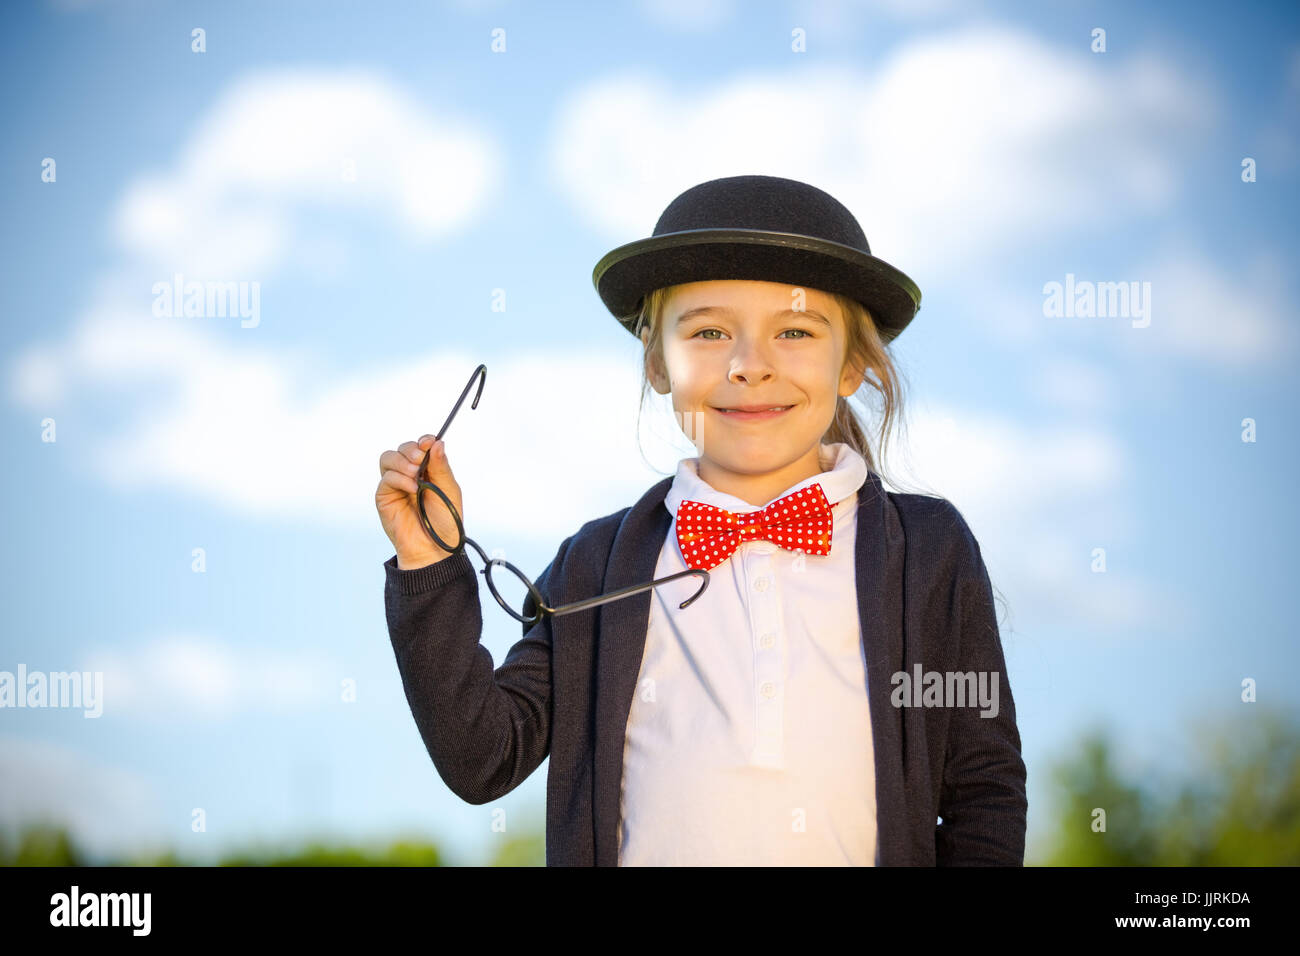 Funny little girl in bow tie and bowler hat. Stock Photo